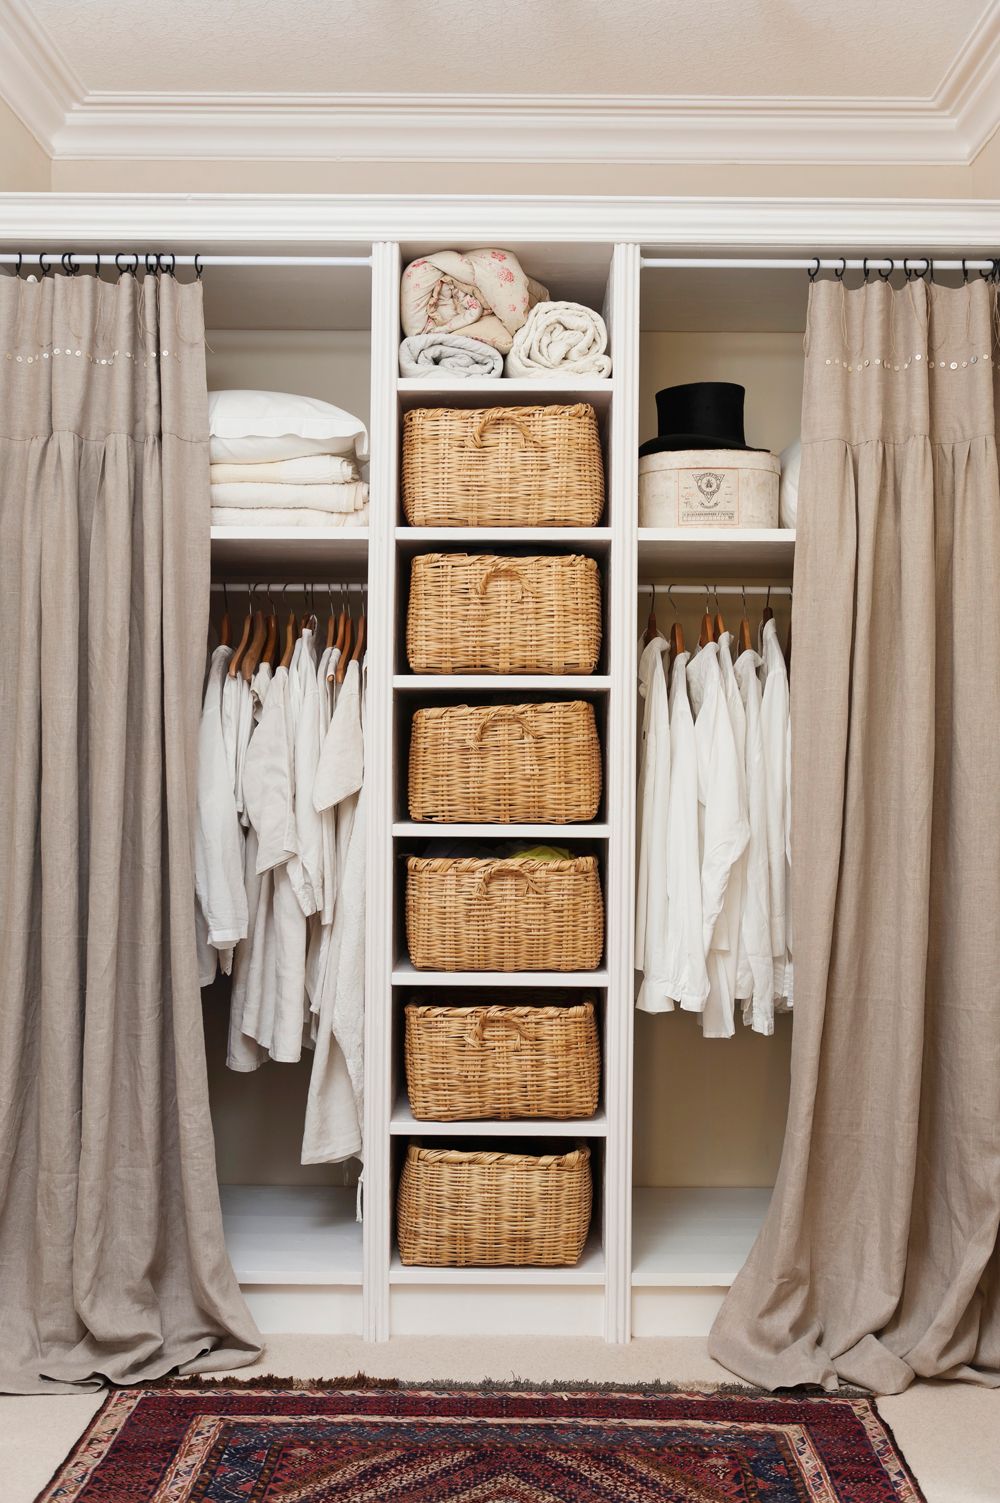 Creative Ways to Organize Your Bedroom Clothes Without Spending a Fortune